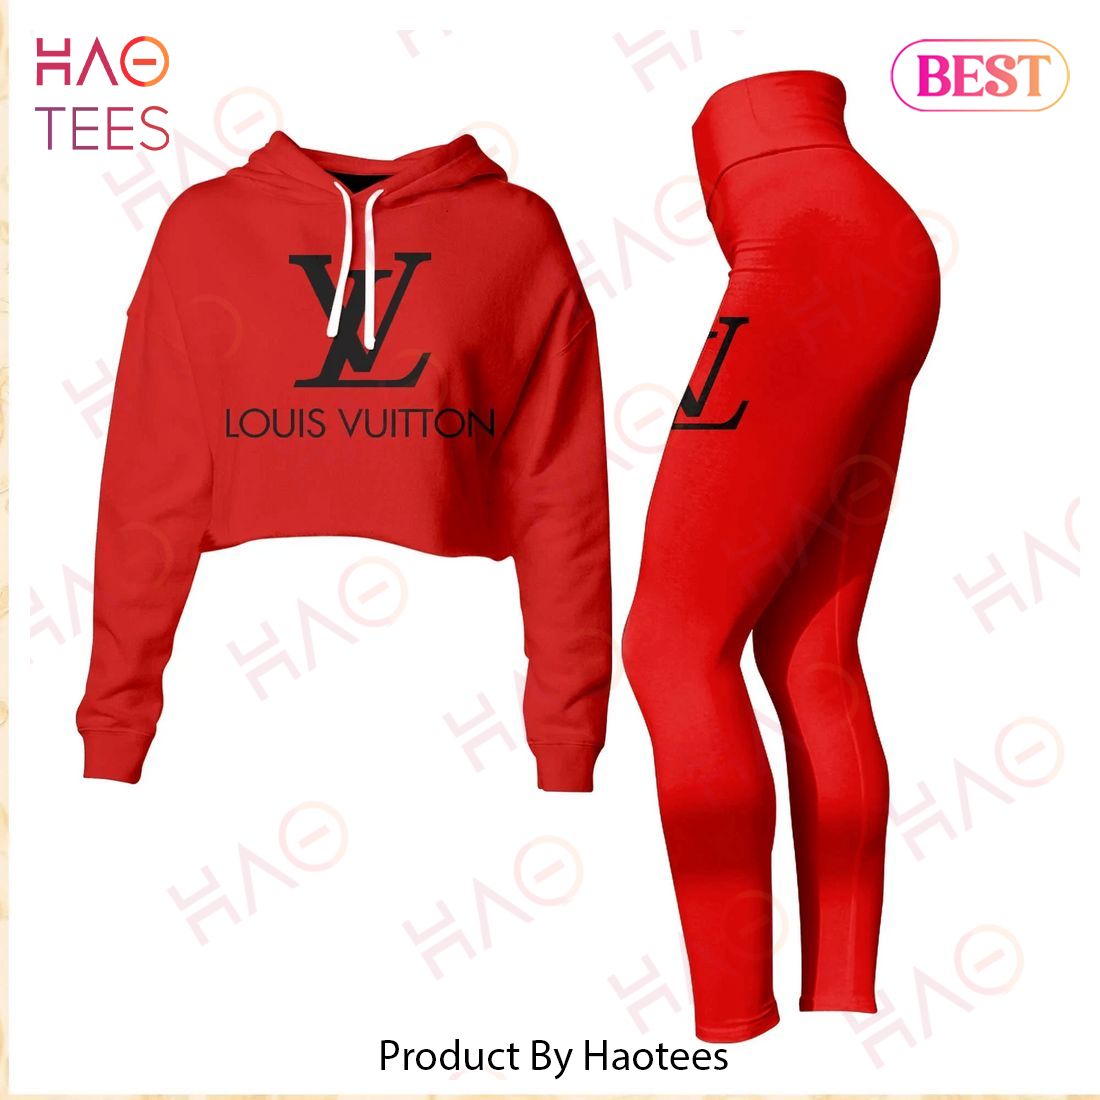 Louis Vuitton Full Red Color Crop Hoodie And Legging Limited Edition